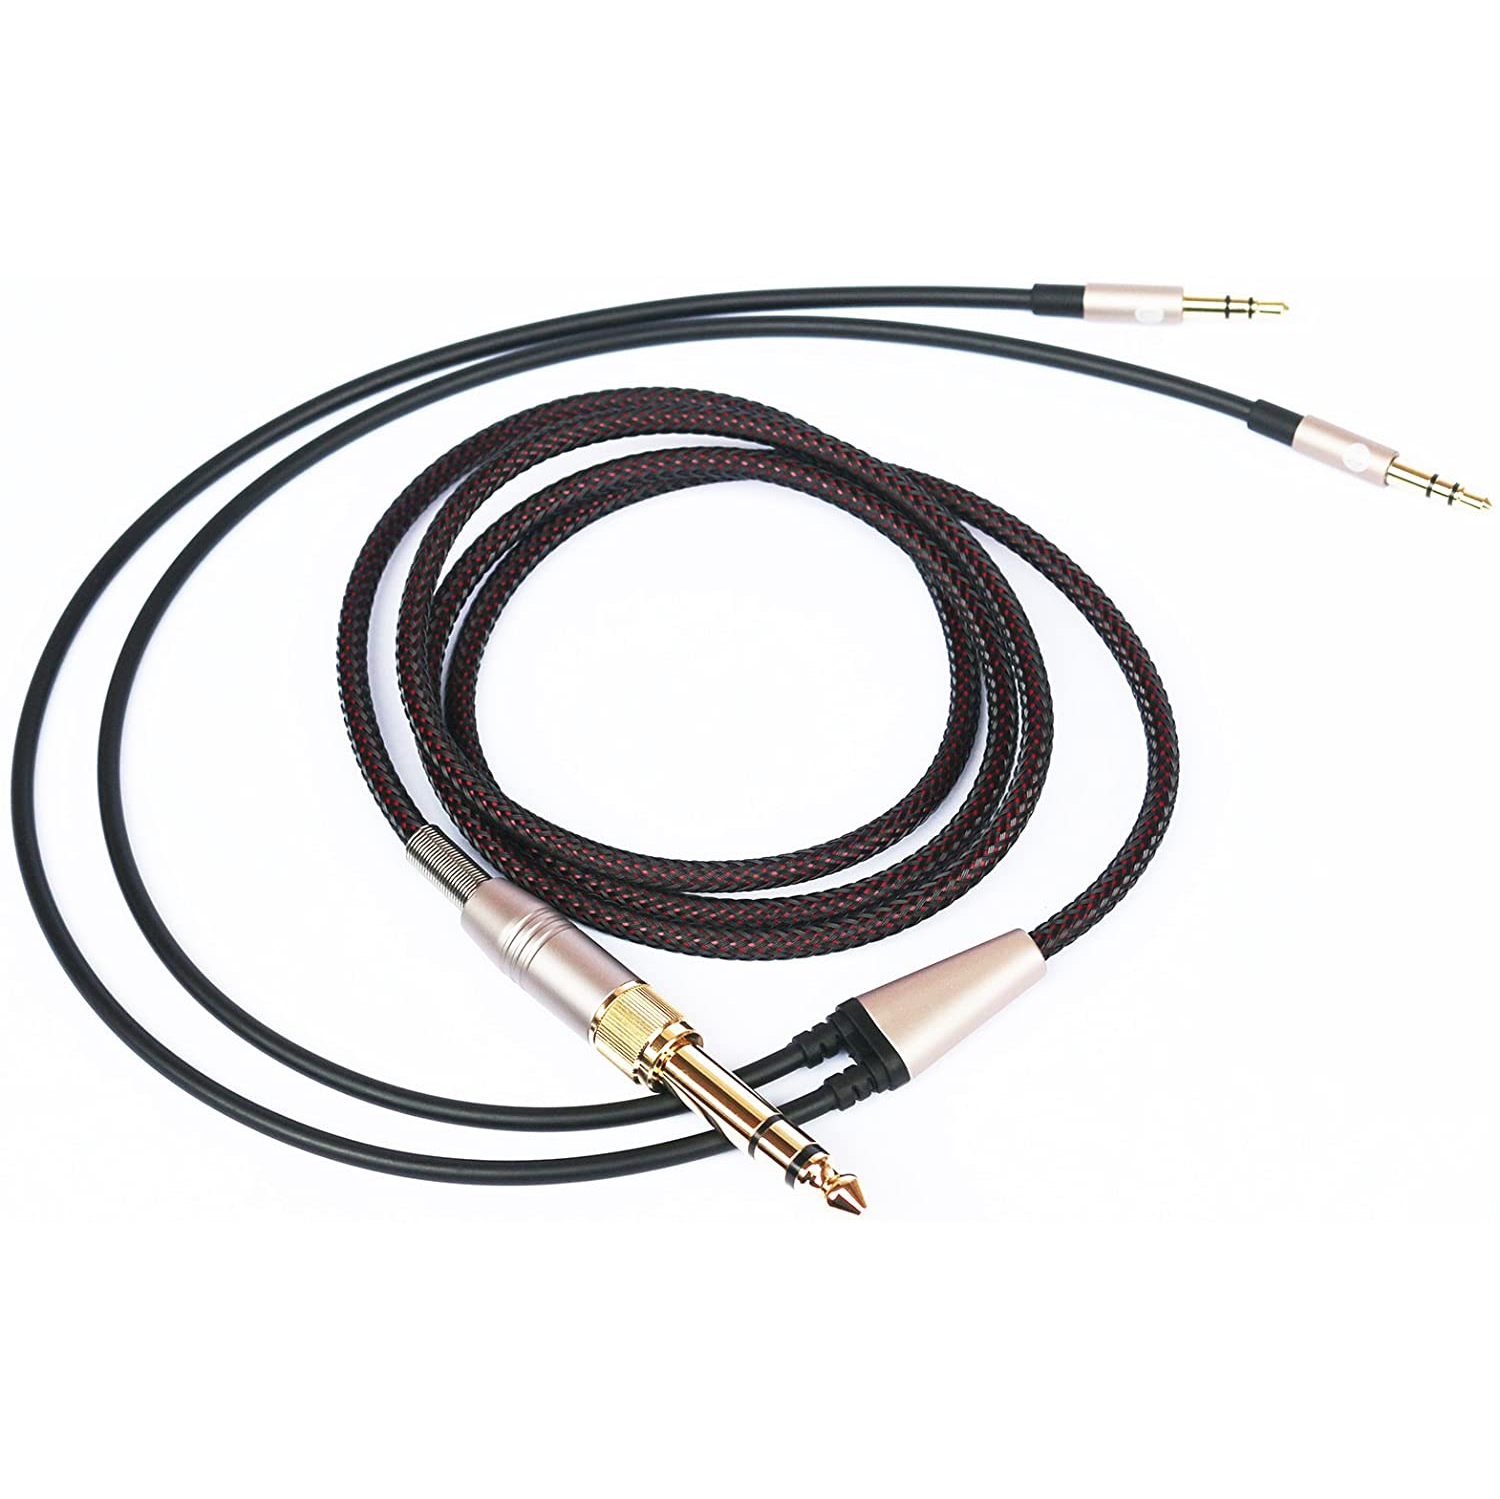 NEW NEOMUSICIA Replacement Cable Compatible with Hifiman HE4XX, HE-400i (The Latest Version with Both 3.5mm Plug) Headphones